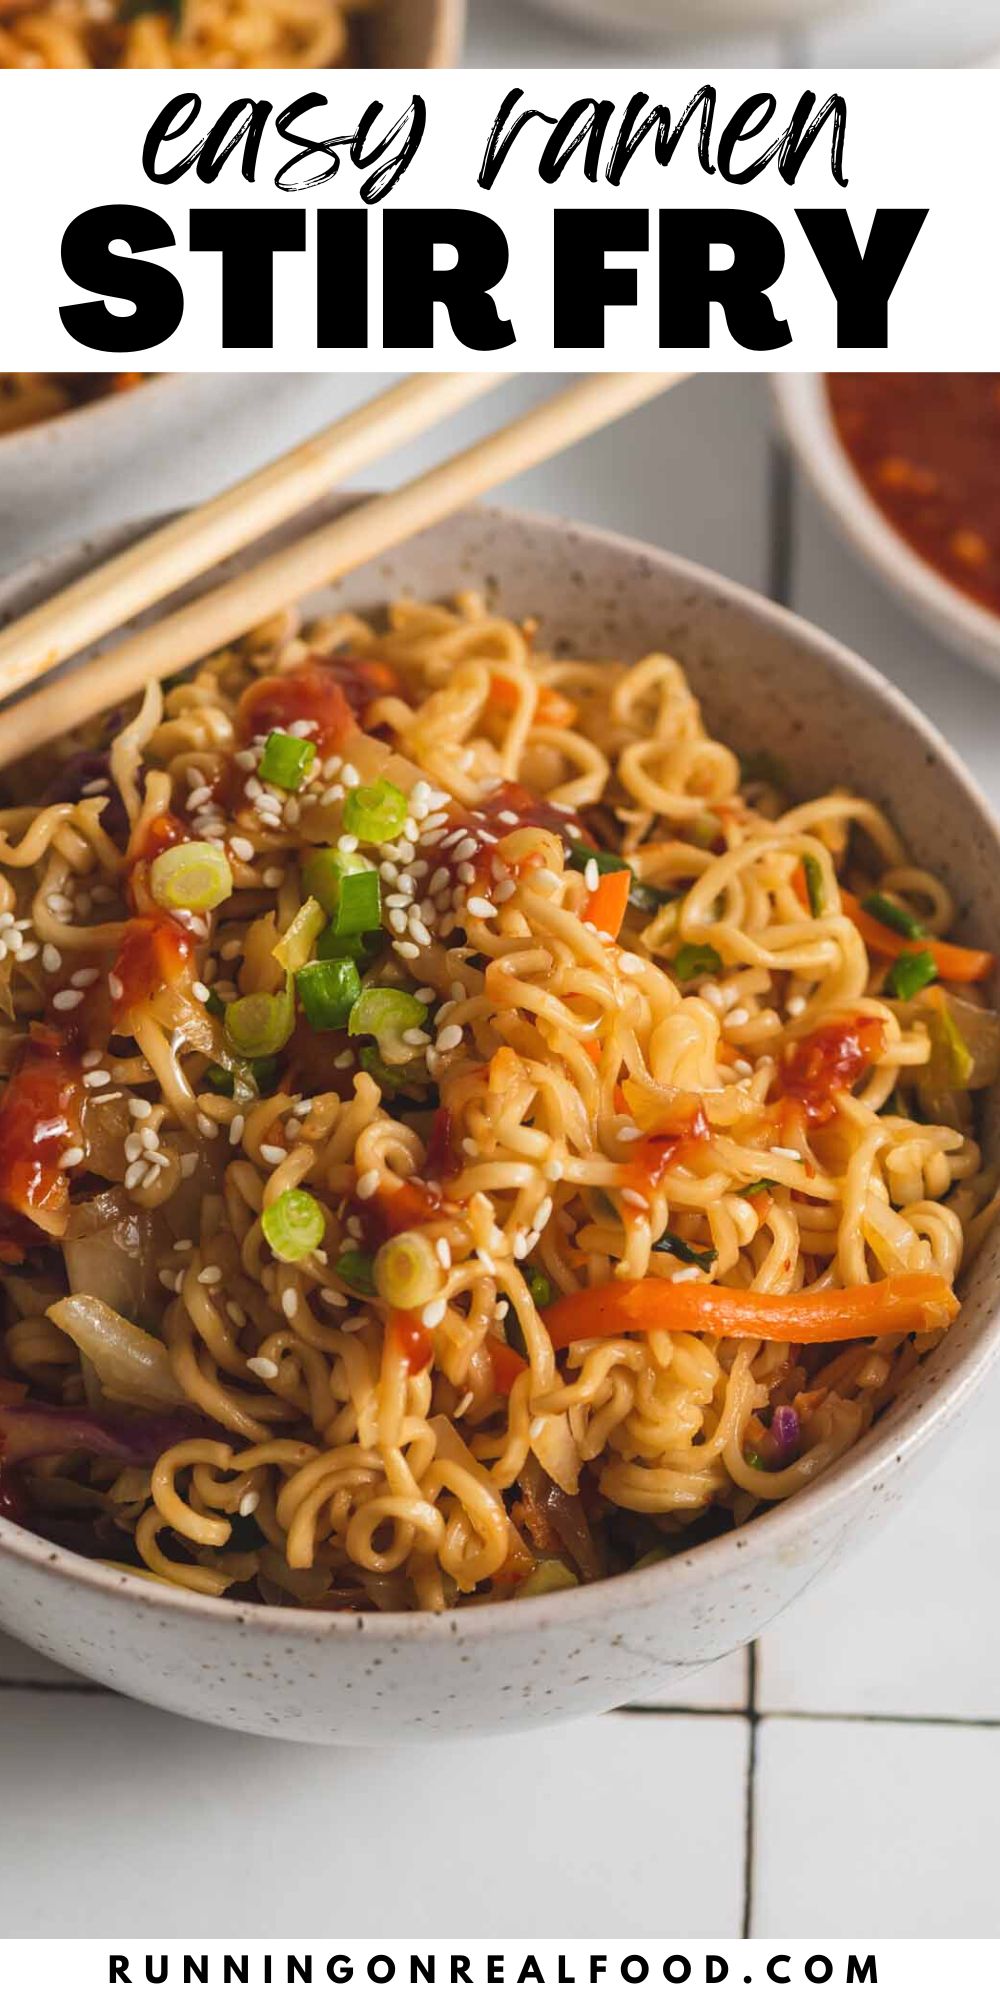 An image of a ramen noodle stir fry with text overlay between the images reading "easy ramen stir fry".